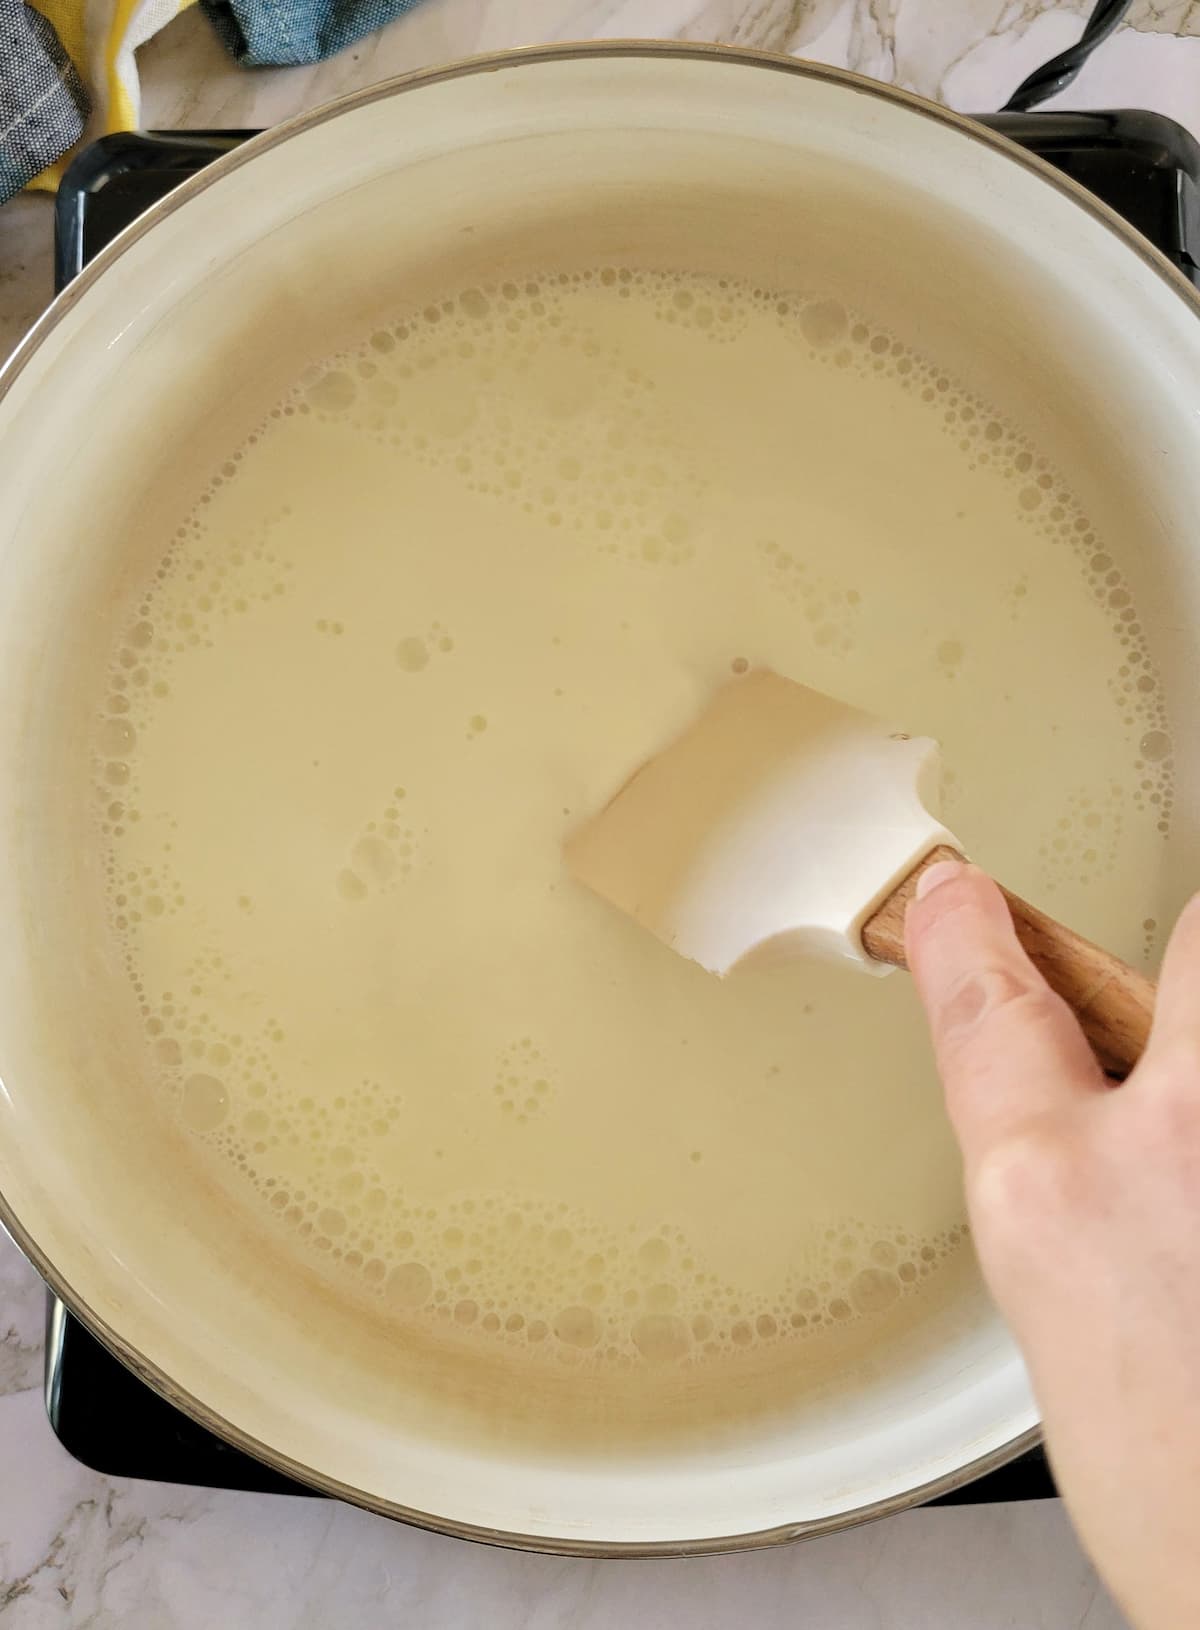 hand with a rubber spatula stirring milk in a pot